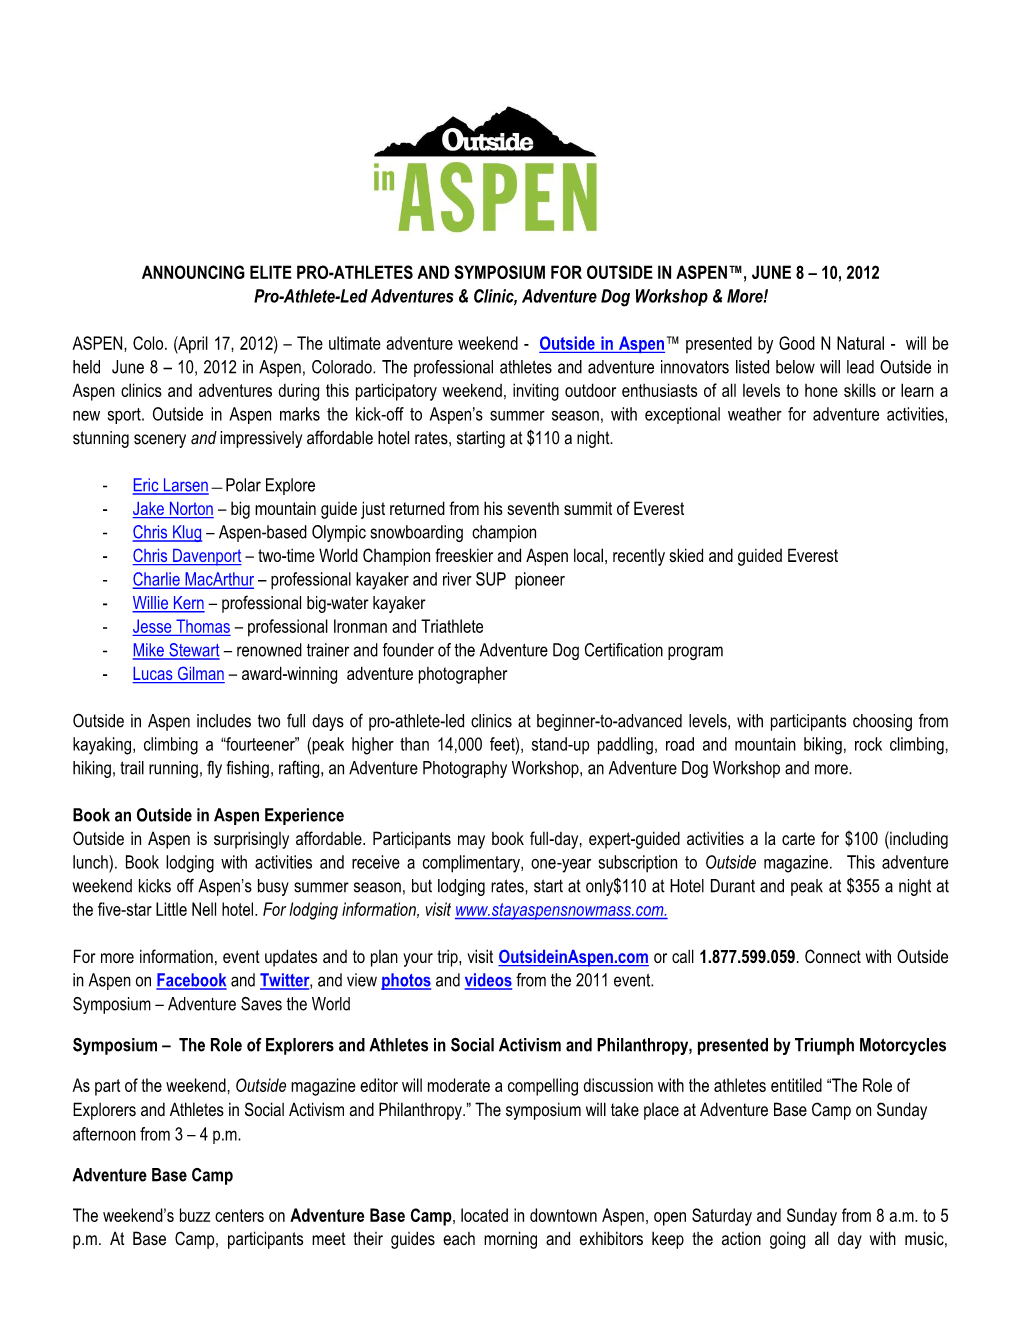 ANNOUNCING ELITE PRO-ATHLETES and SYMPOSIUM for OUTSIDE in ASPEN™, JUNE 8 – 10, 2012 Pro-Athlete-Led Adventures & Clinic, Adventure Dog Workshop & More!